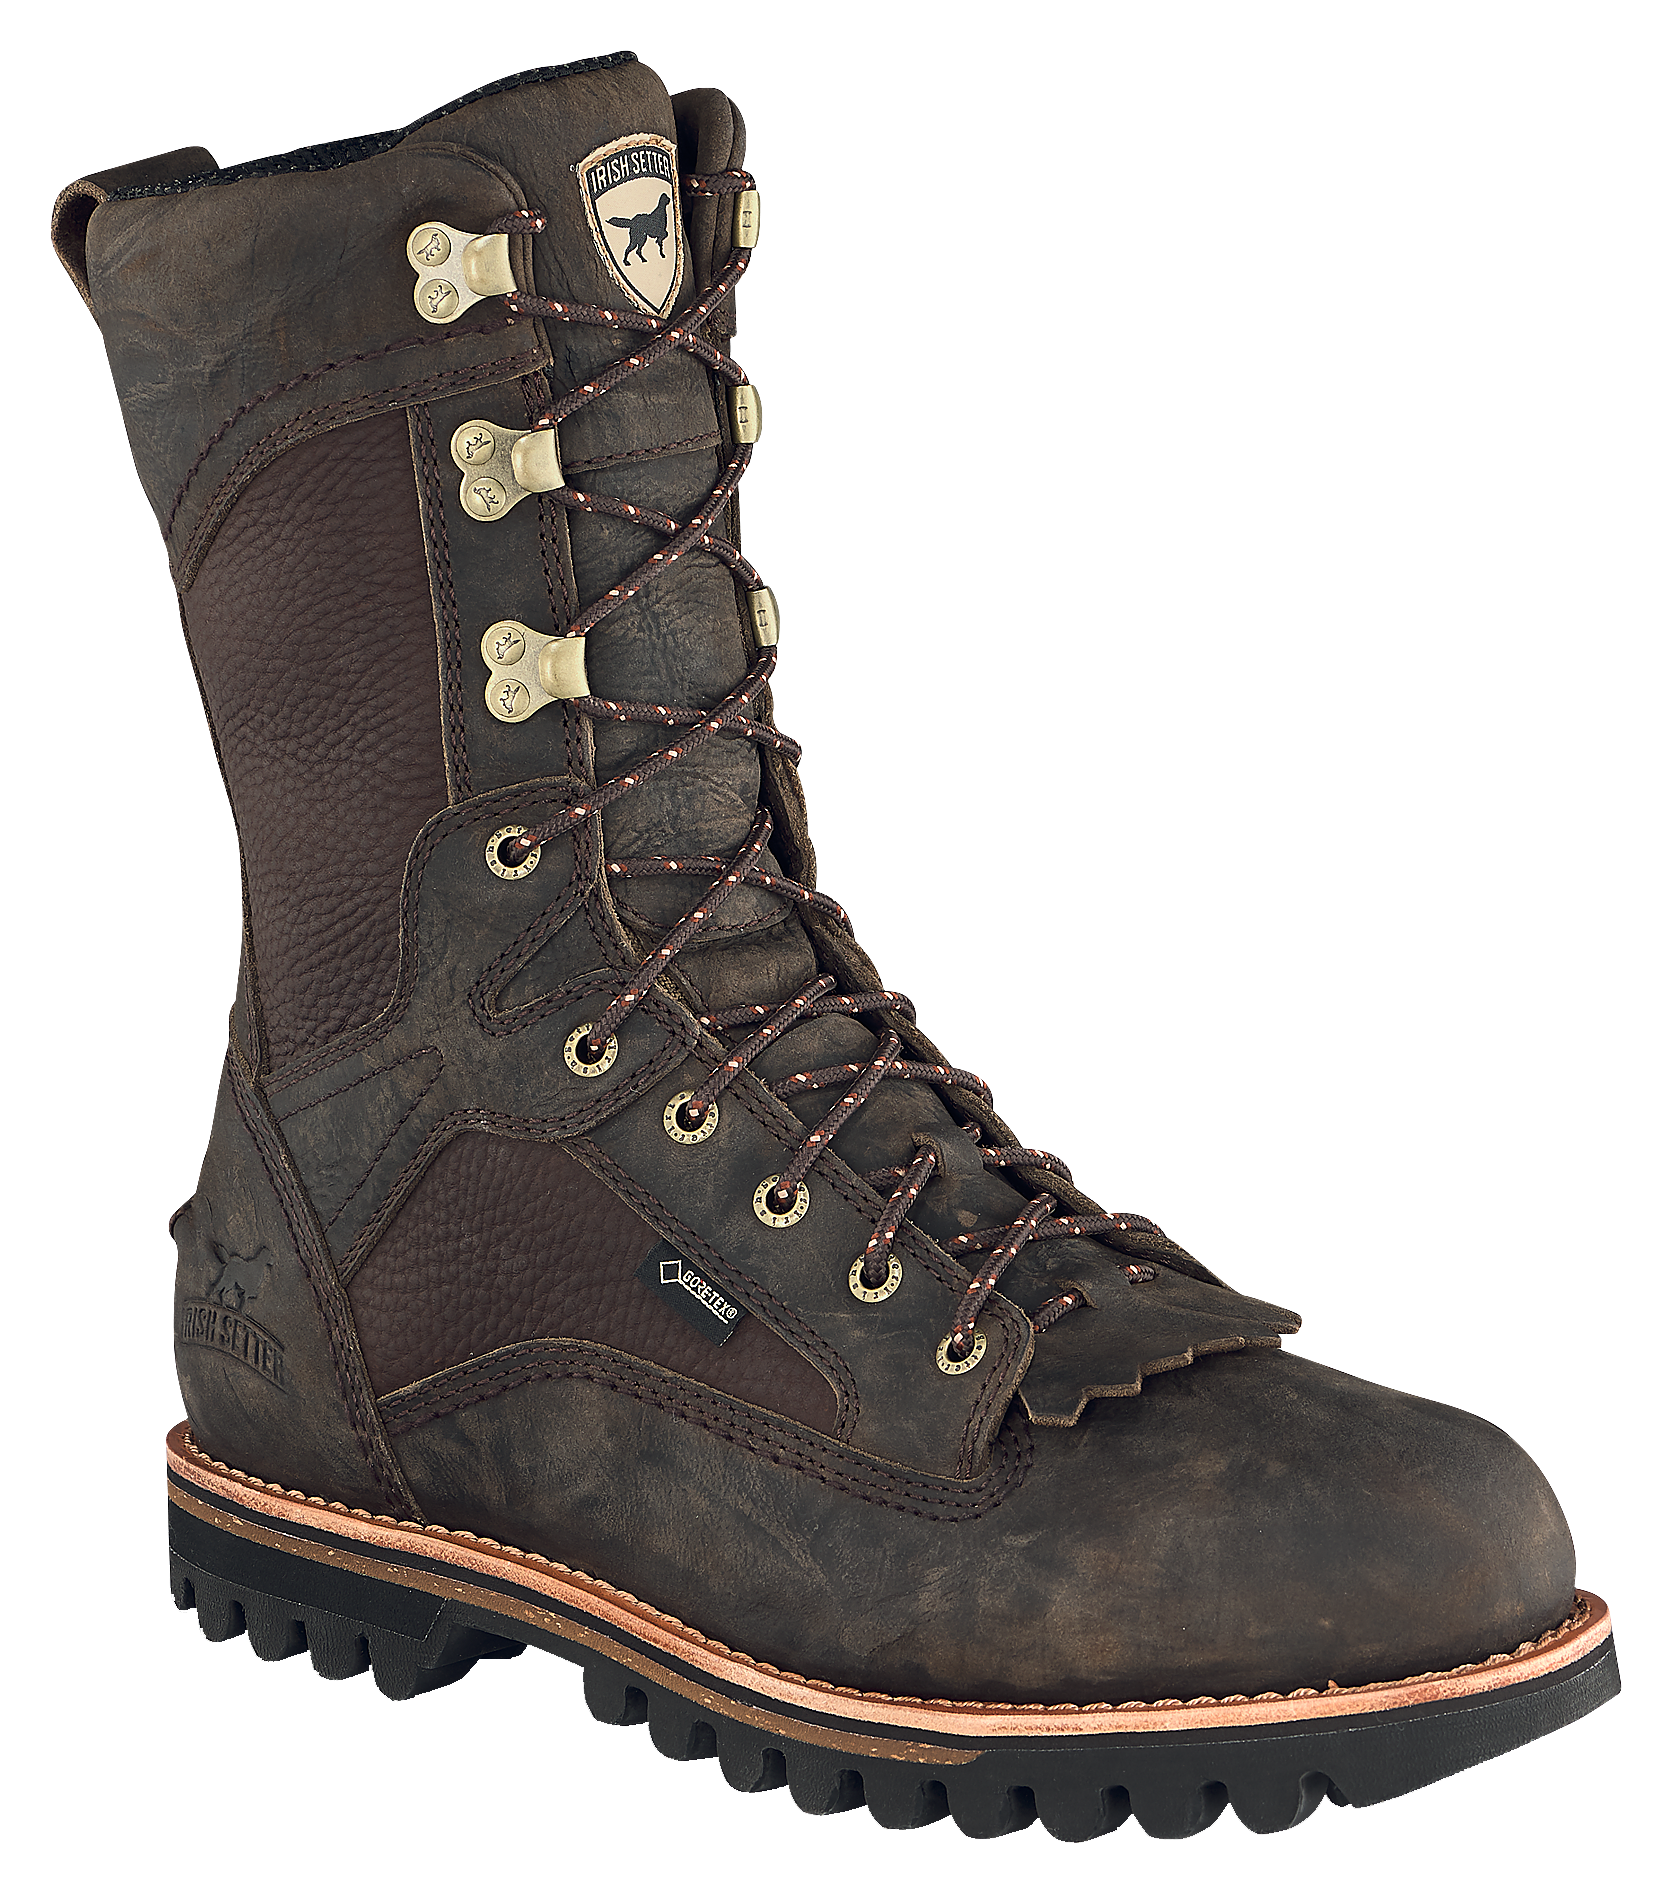 Irish Setter Elk Tracker GORE-TEX Insulated Hunting Boots for Men - Brown - 11.5W